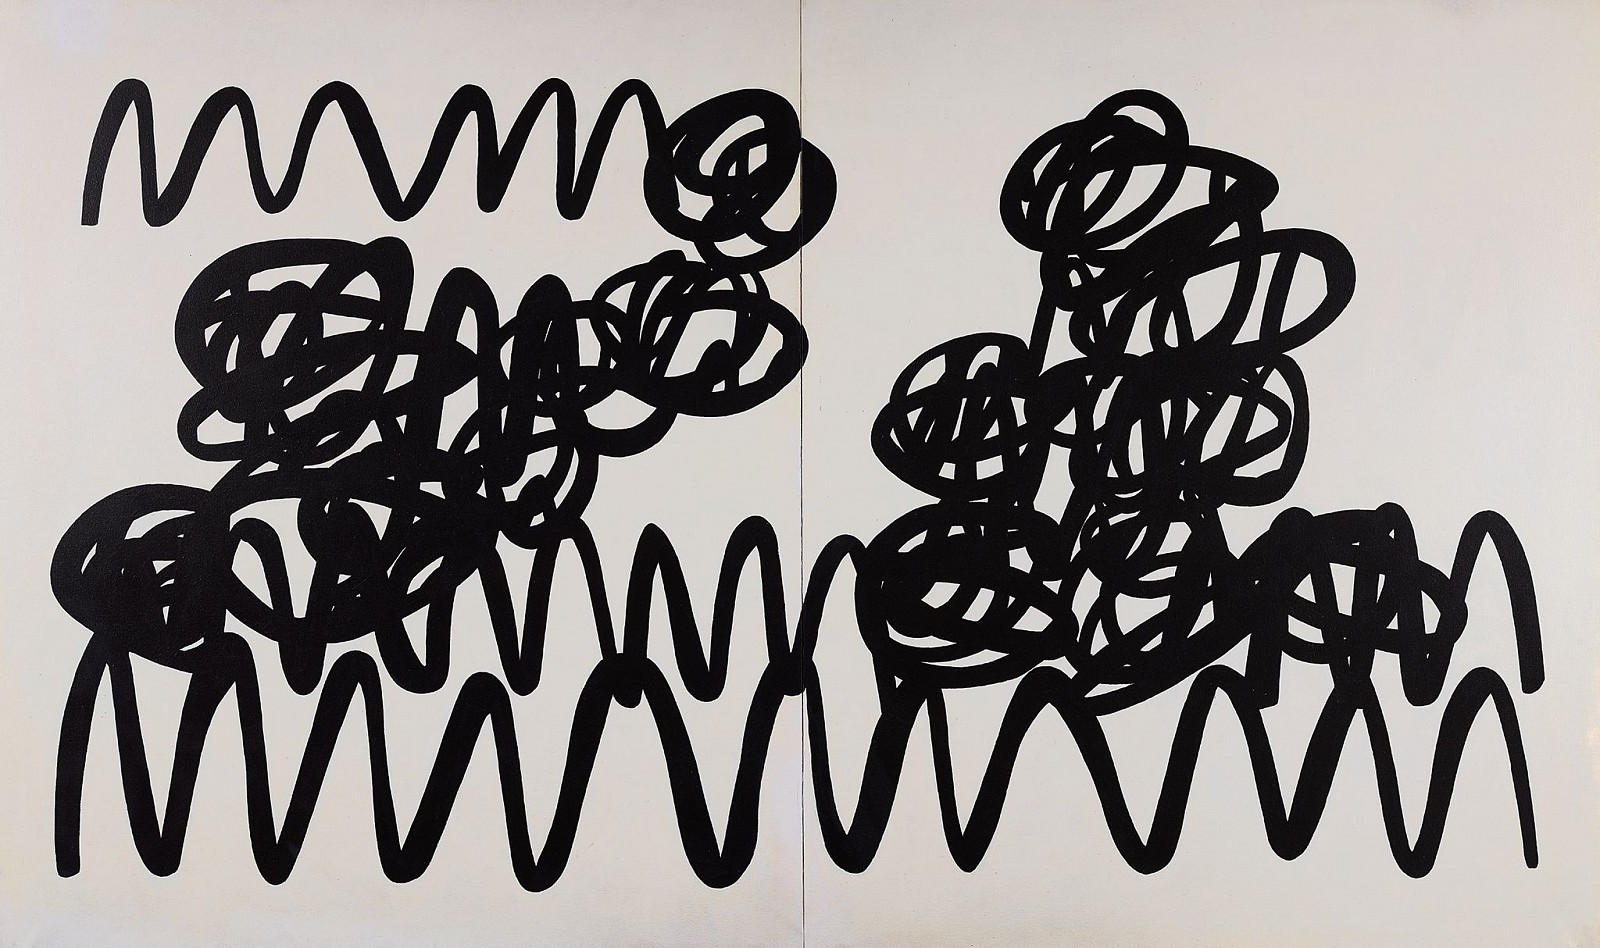 Raymond Hendler, Life is a Matter of Opinion-Living, Better Opinion Versus Less Good Opinion, 1978
Acrylic on canvas, 60 x 100 in. (152.4 x 254 cm)
© Estate of Raymond Hendler
HEN-00228